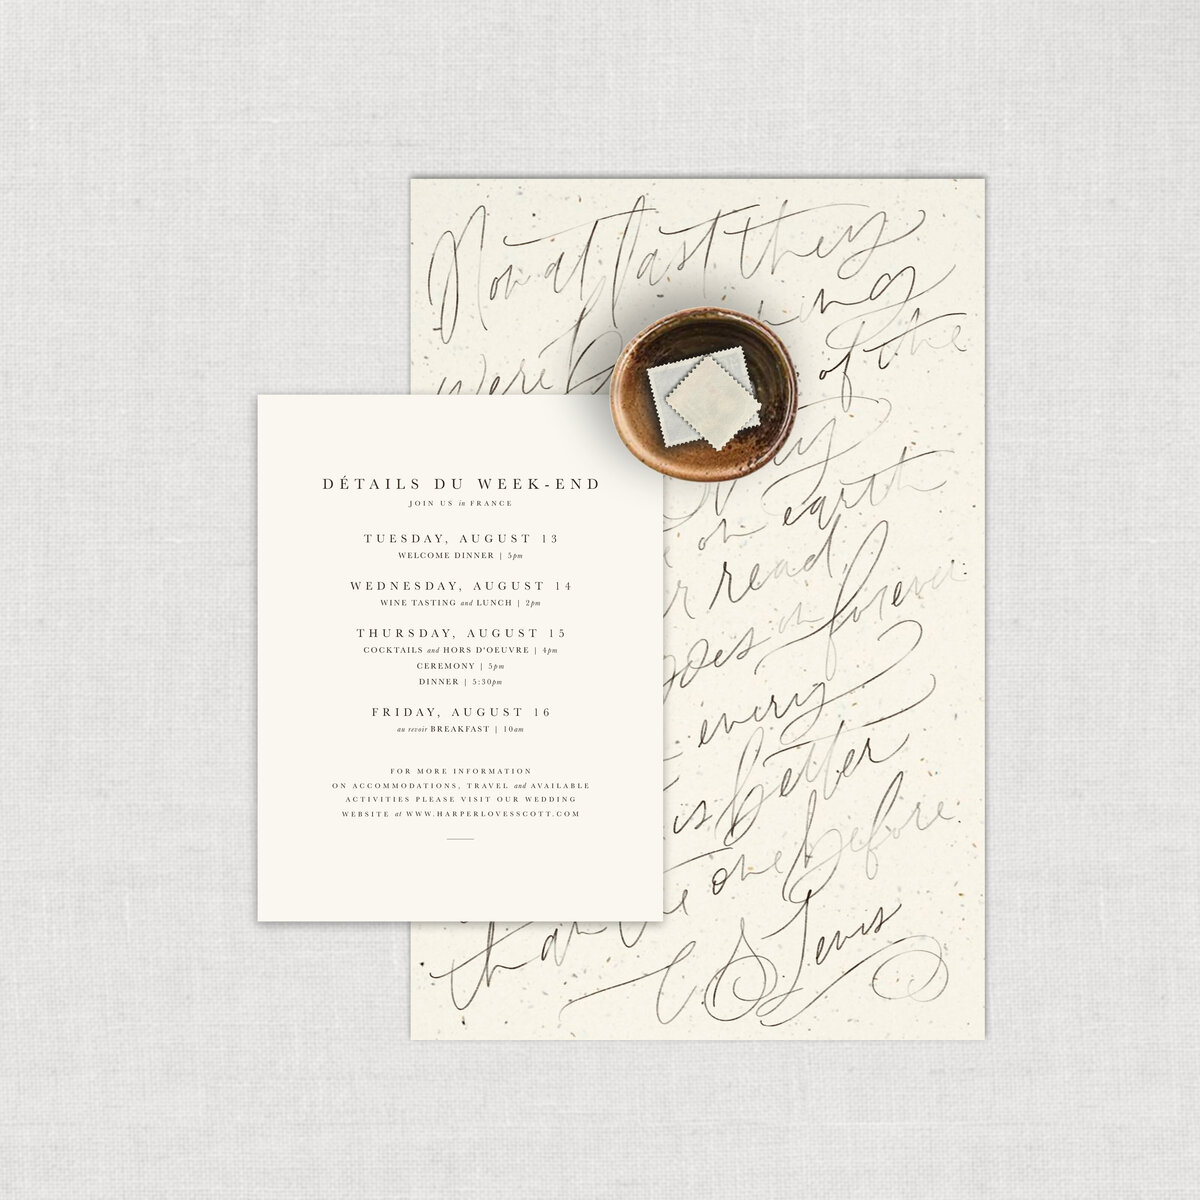 Romantic Wedding Weekend Wedding Invitation Details Card with love letter printed invitation wrap.